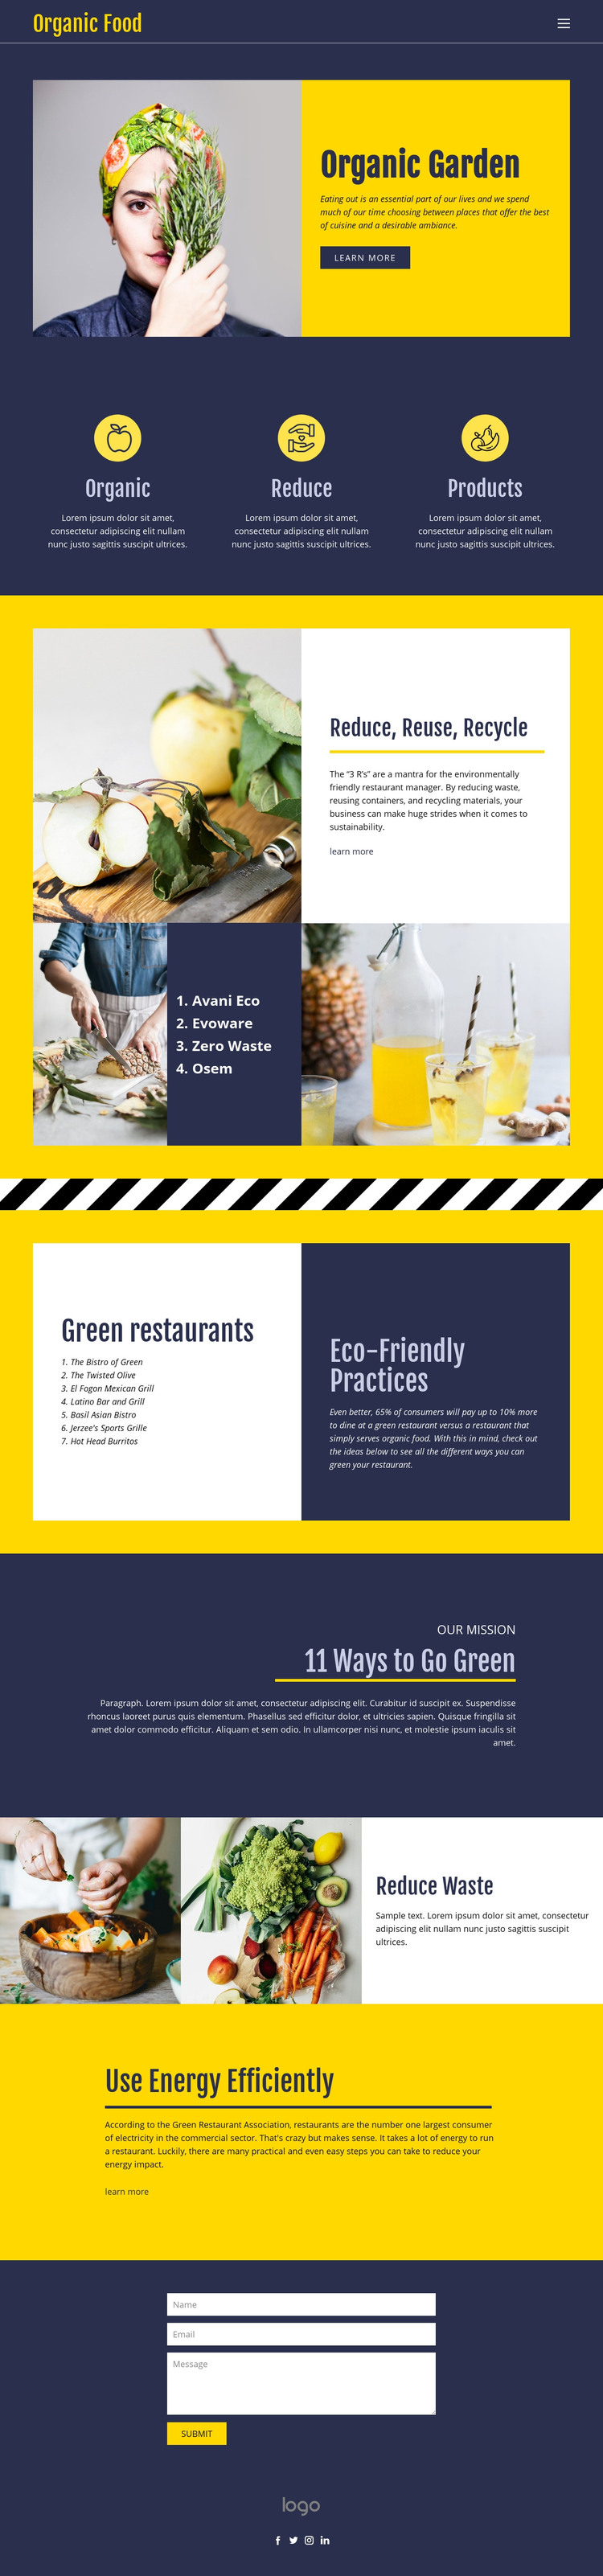 Eating essentials for food Homepage Design